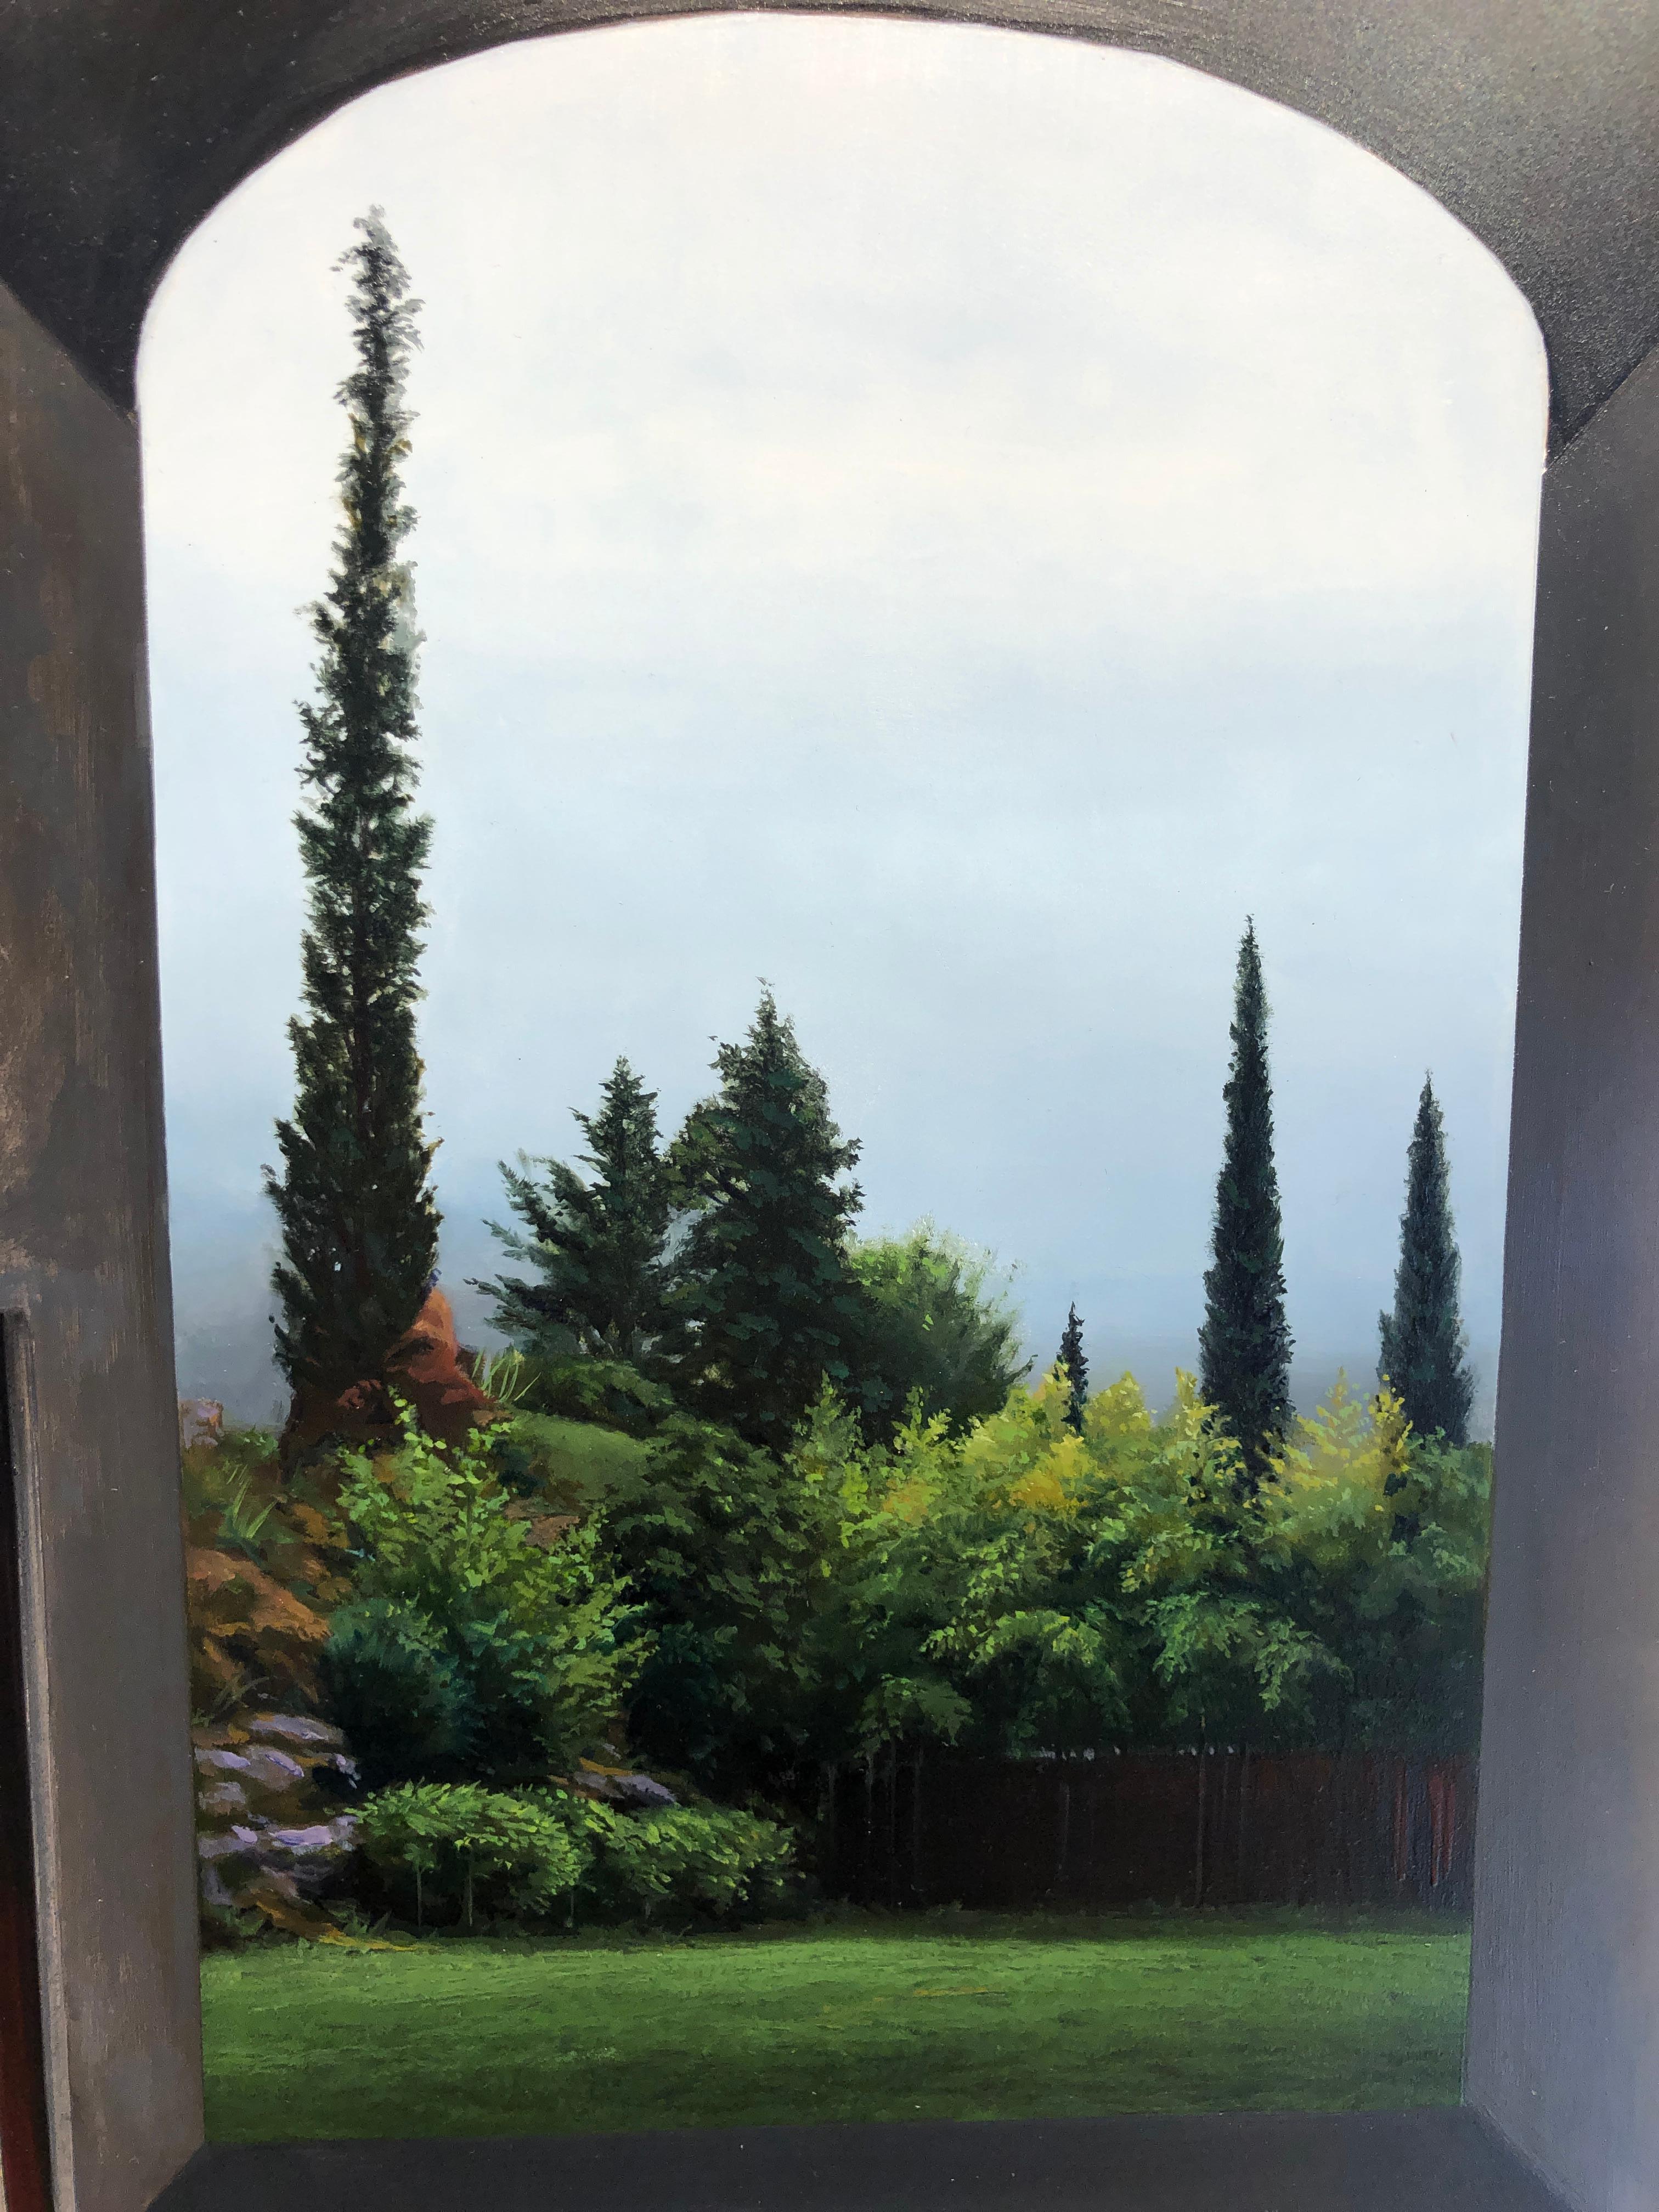 Altered - Medieval Architecture and Arched Doorways Leading to Lush Landscape - Beige Landscape Painting by Carol Pylant